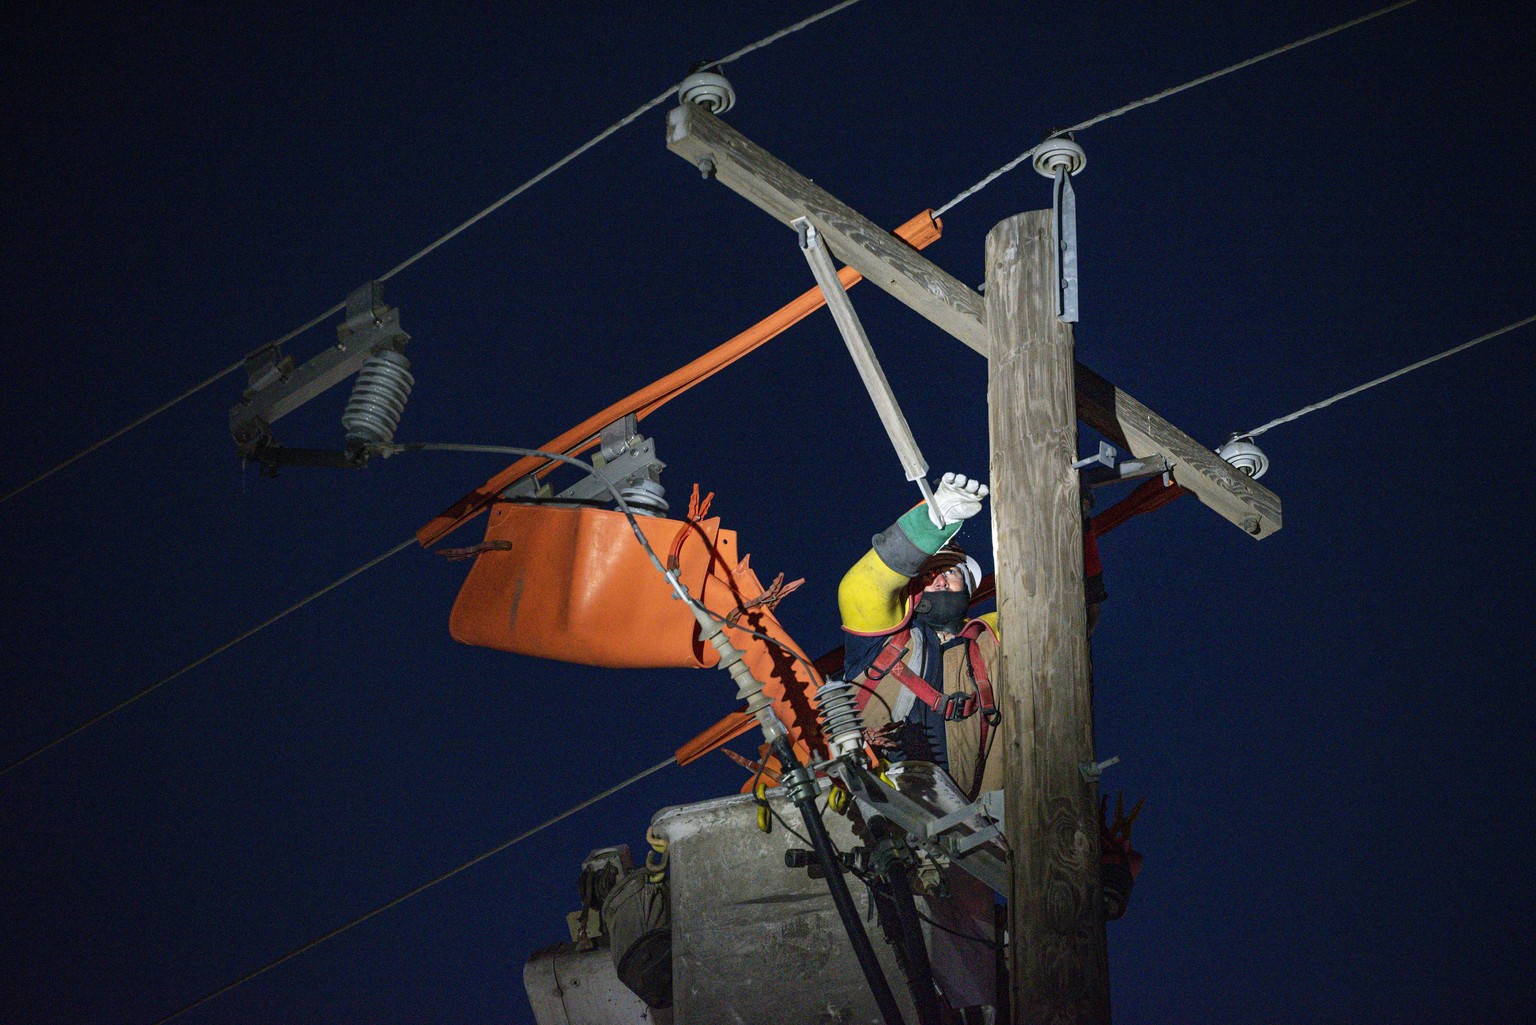 Oncor apprentice lineman Brendan Waldon repairs a utility pole that was damaged by the winter storm that passed through Texas Thursday, Feb. 18, 2021, in Odessa, Texas. (Eli Hartman/Odessa American vi ...